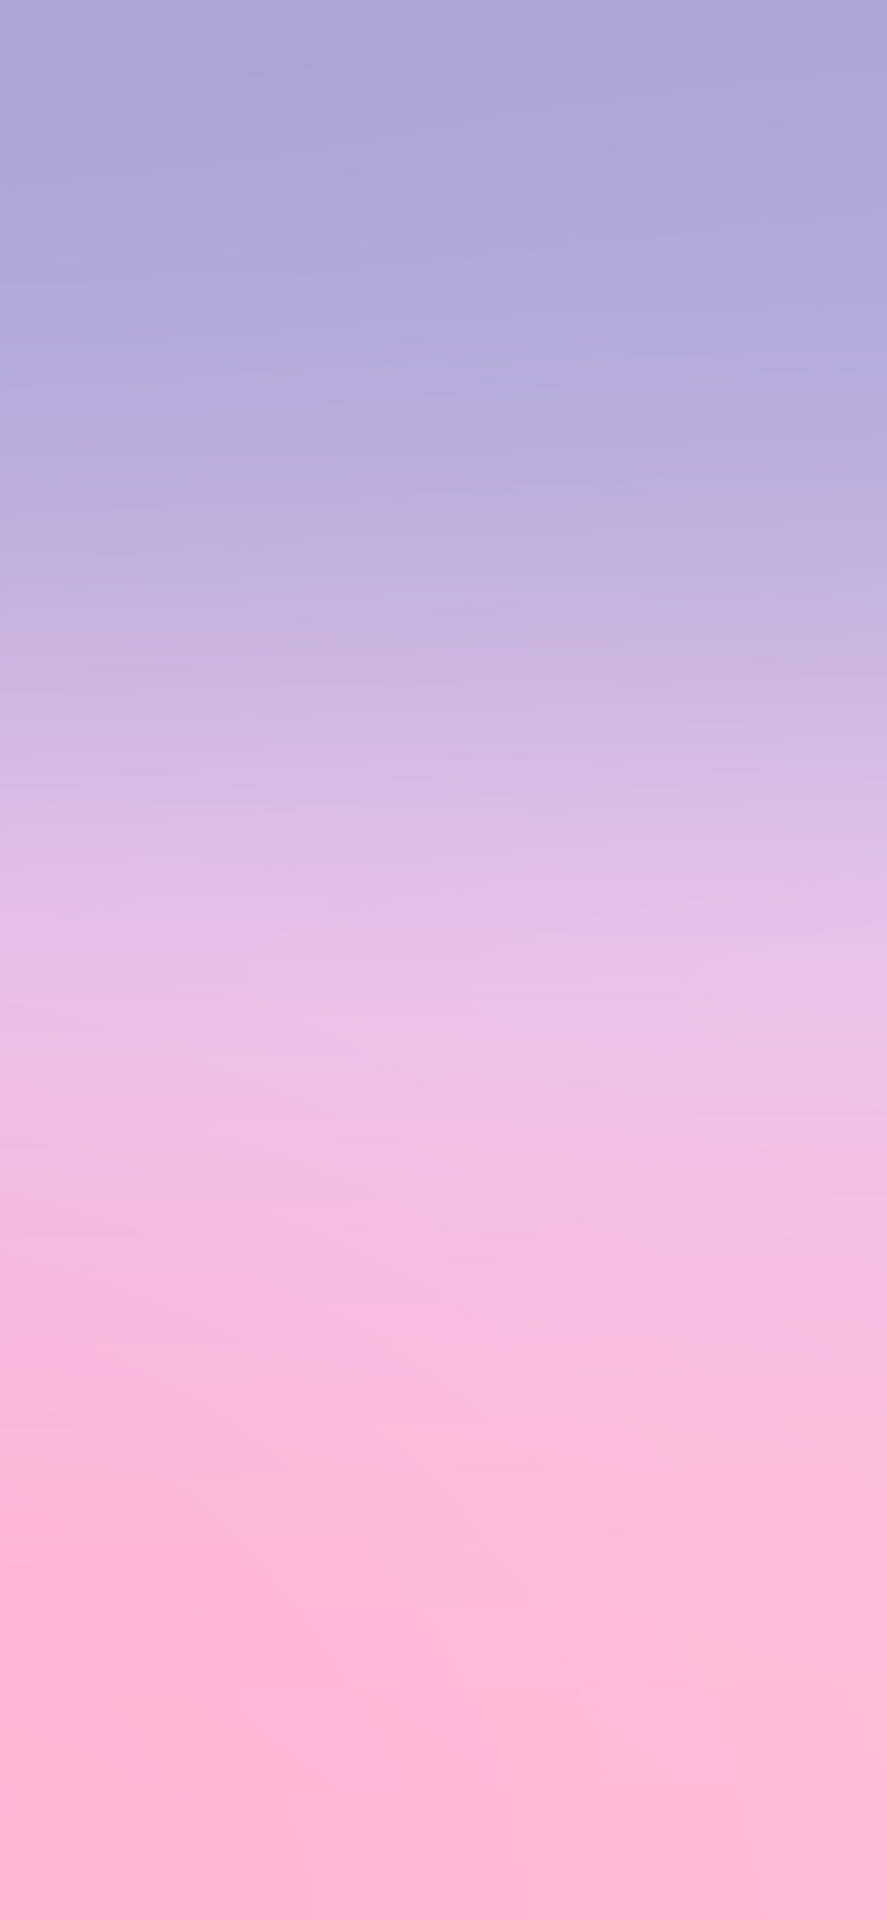 Pastel gradient blur vector background  free image by rawpixelcom  nunny   Pastel background Pastel gradient Iphone wallpaper for phone